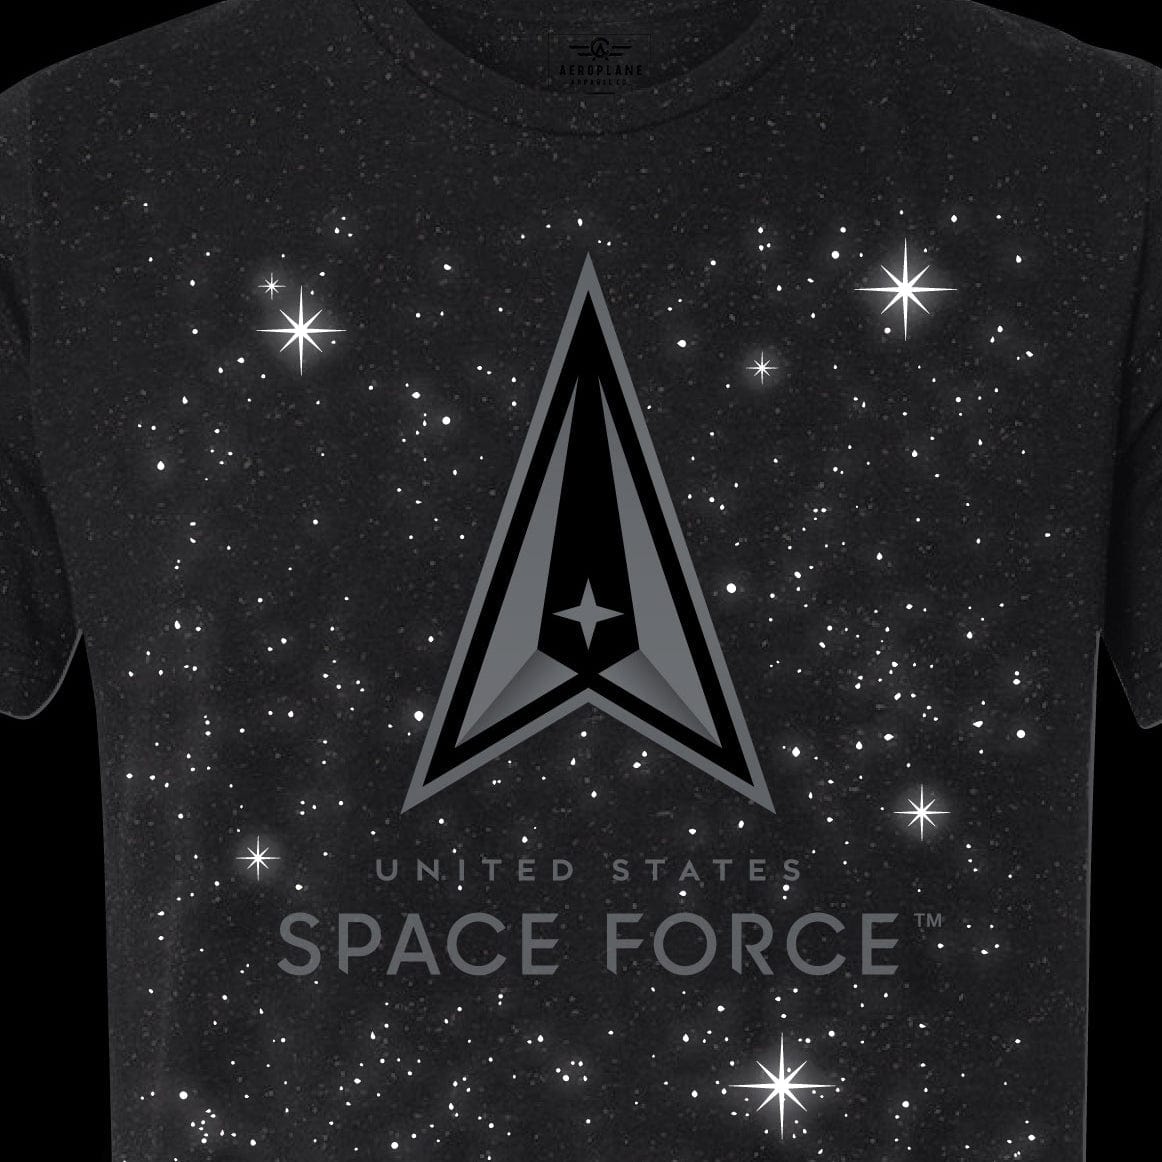 U.S. Space Force Officially Licensed Aeroplane Apparel Co. Men's T-Shirt